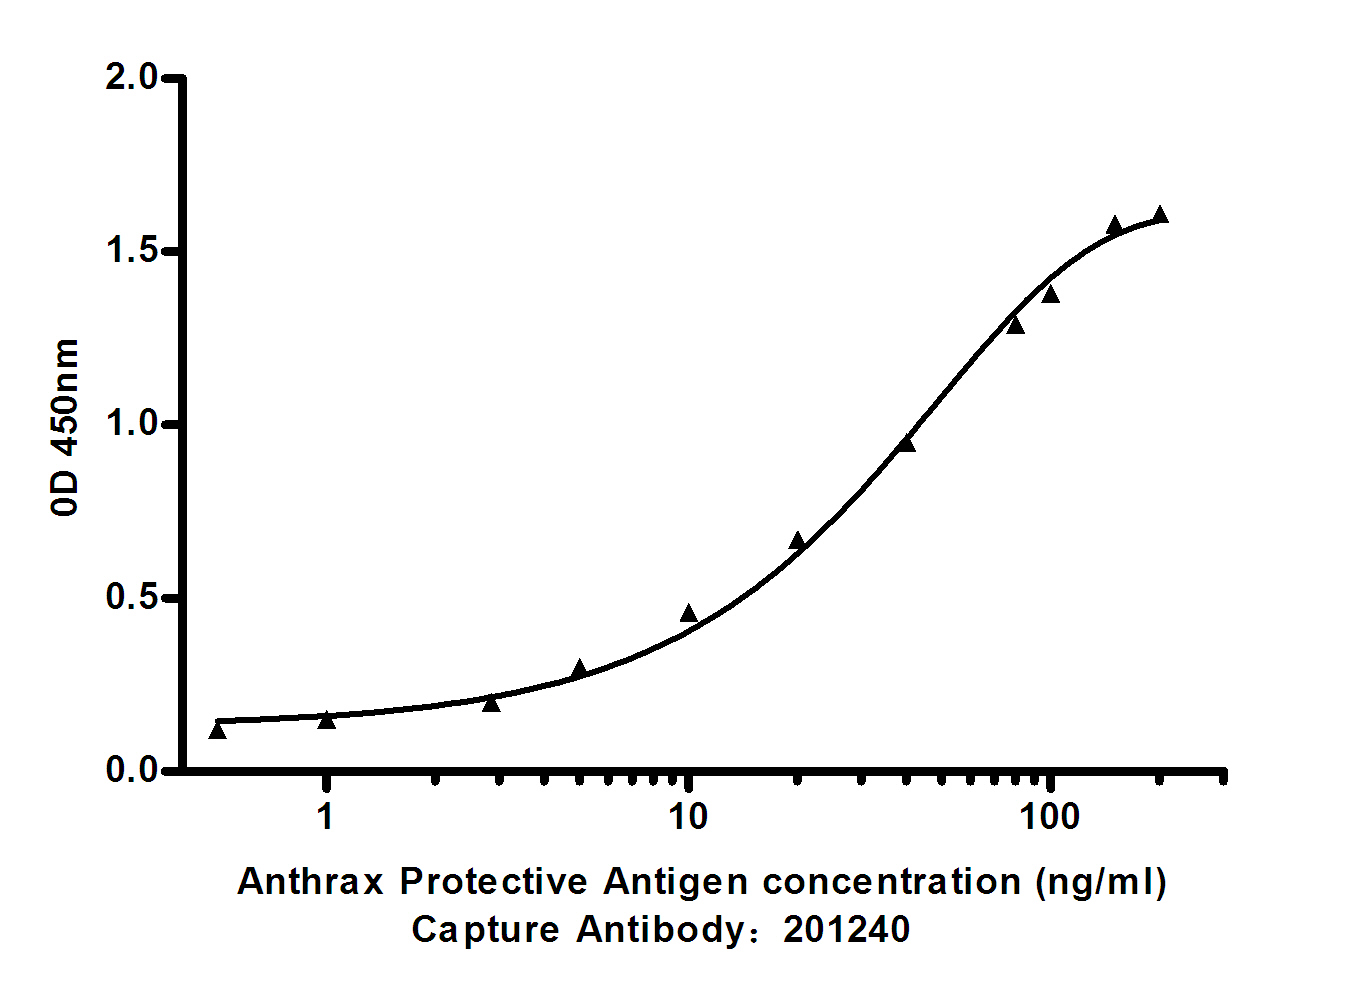 Standard Curve for Anthrax Protective Antigen: Capture Antibody Mouse mAb 168268 to Anthrax Protective Antigen at 4u03bcg/ml and other antibody for detecting.